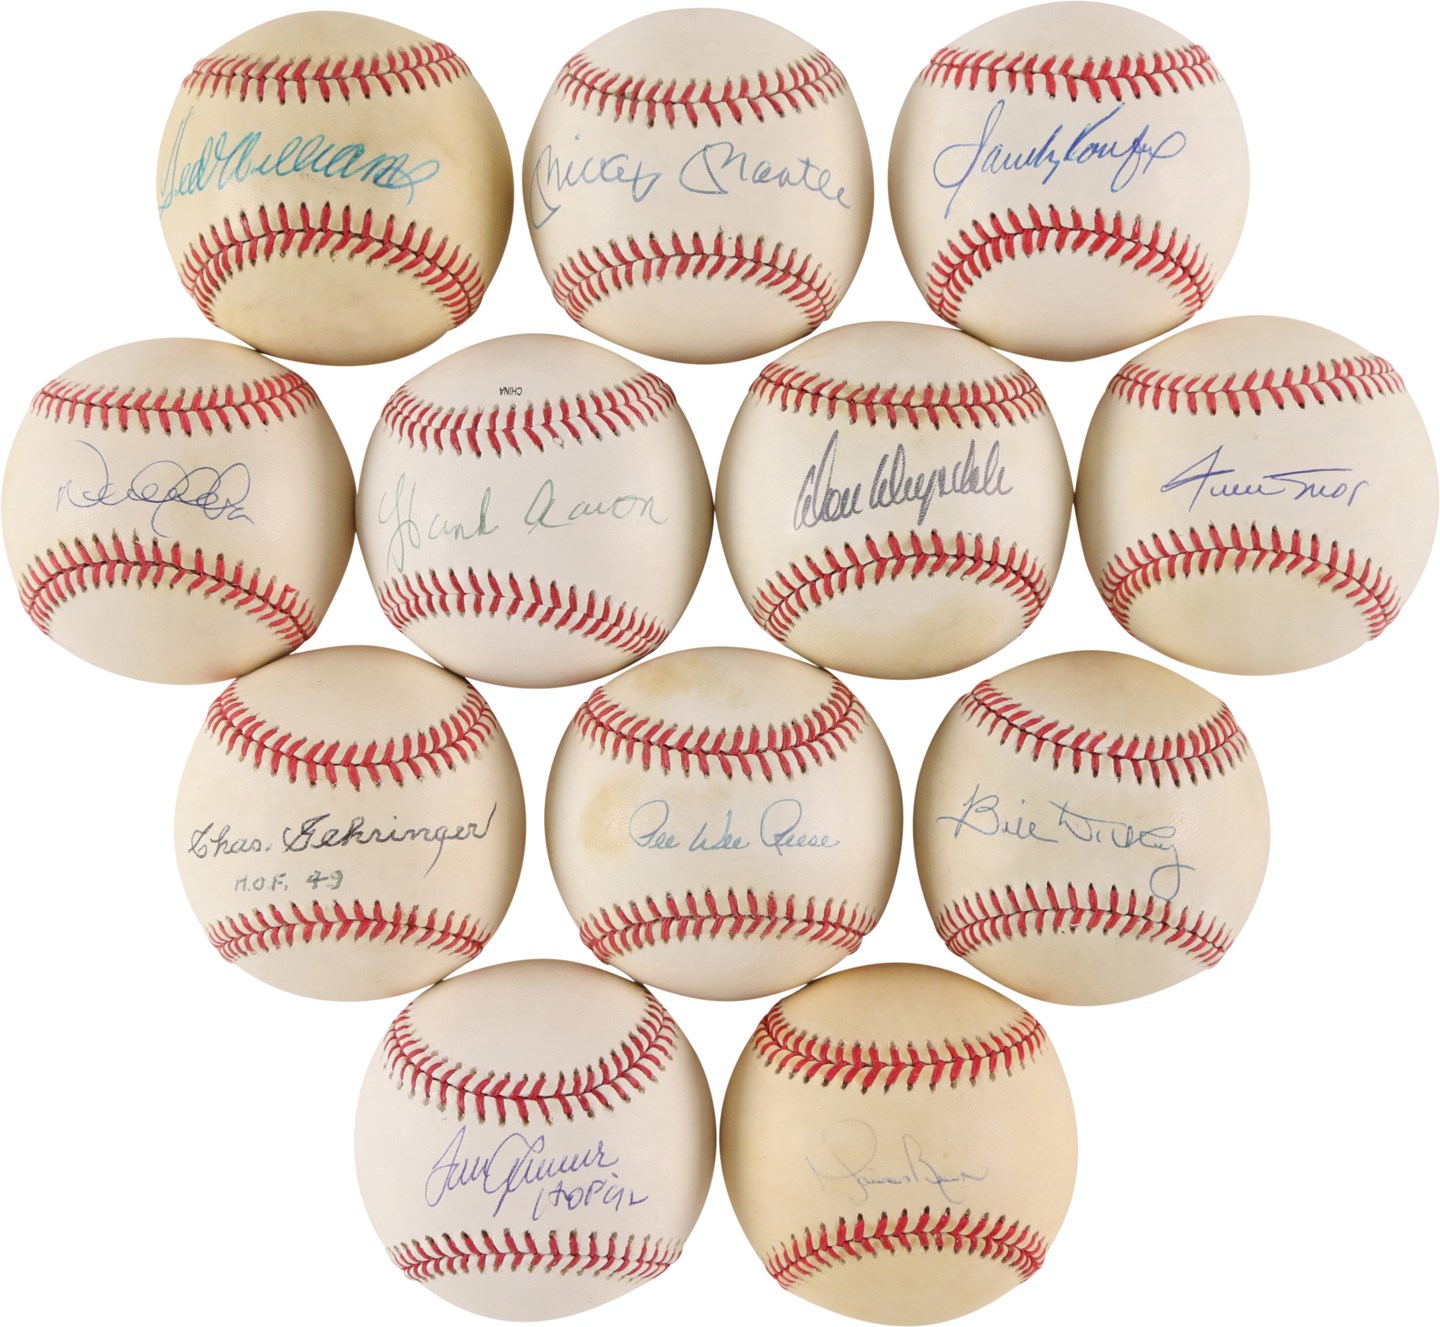 Hall of Famers Signed Baseball Collection w/Mantle, Williams & Mays (57)